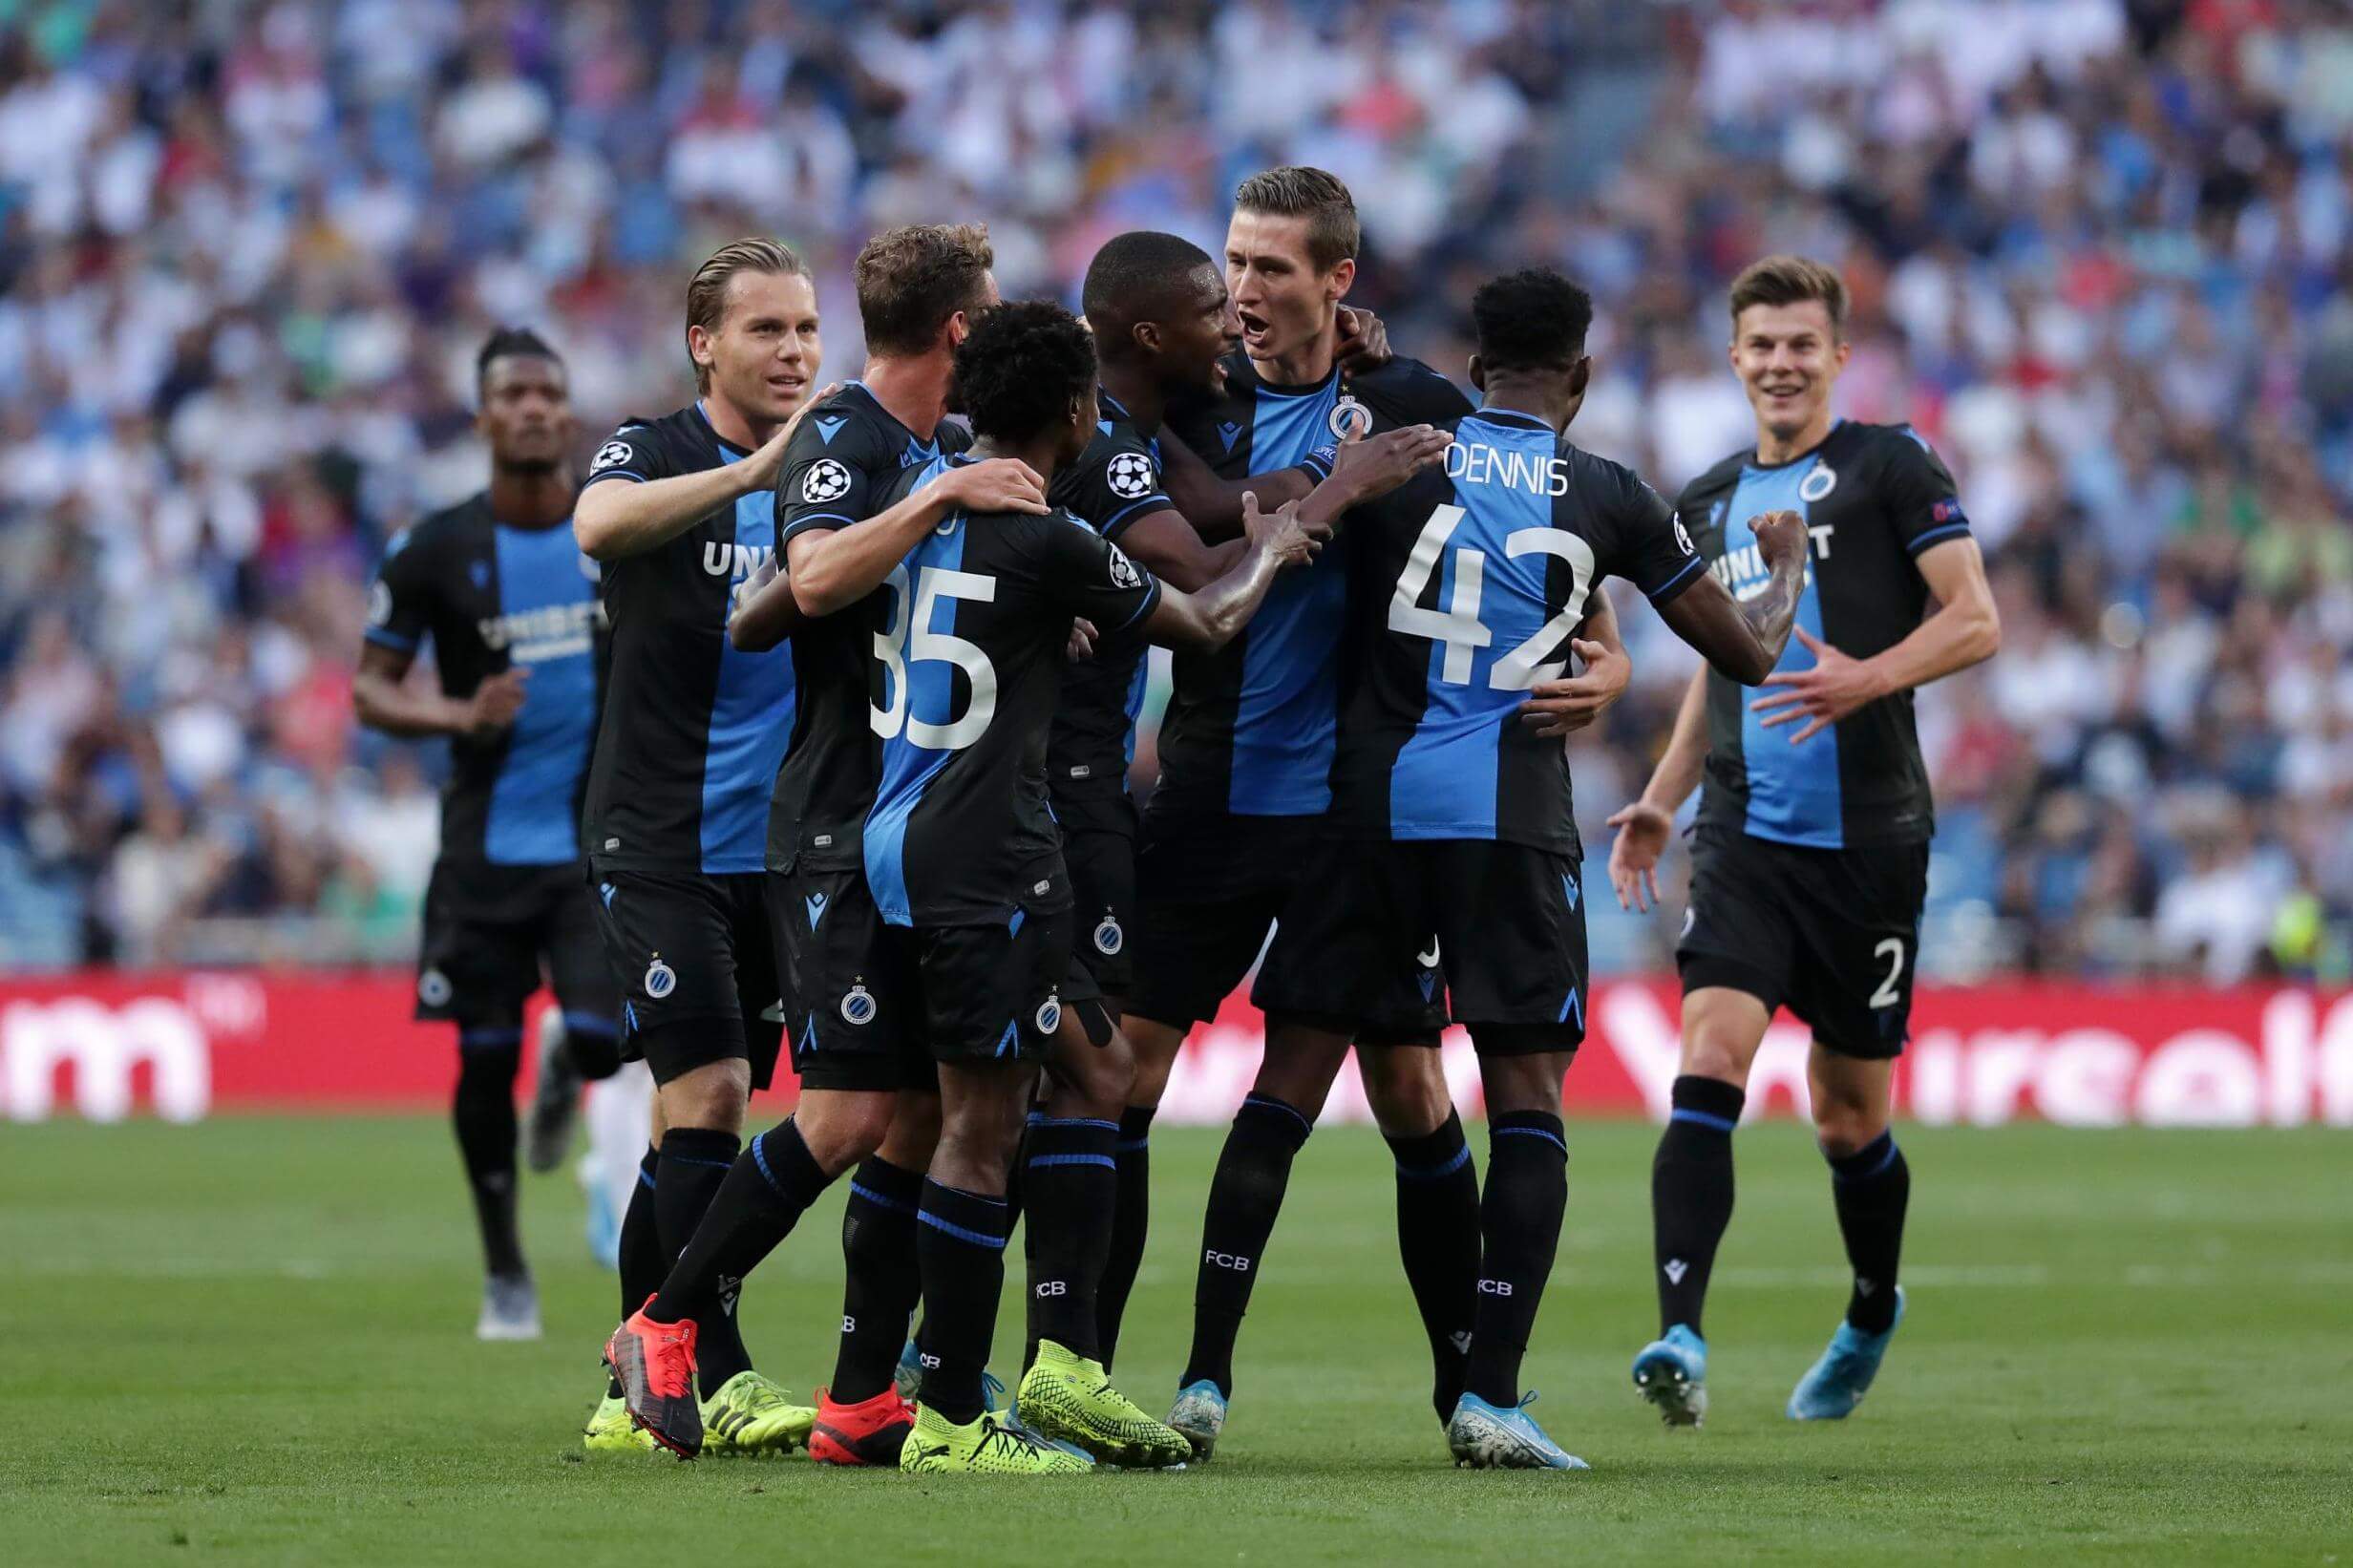  Club Brugge declared Belgian champions after season cancellation over COVID-19